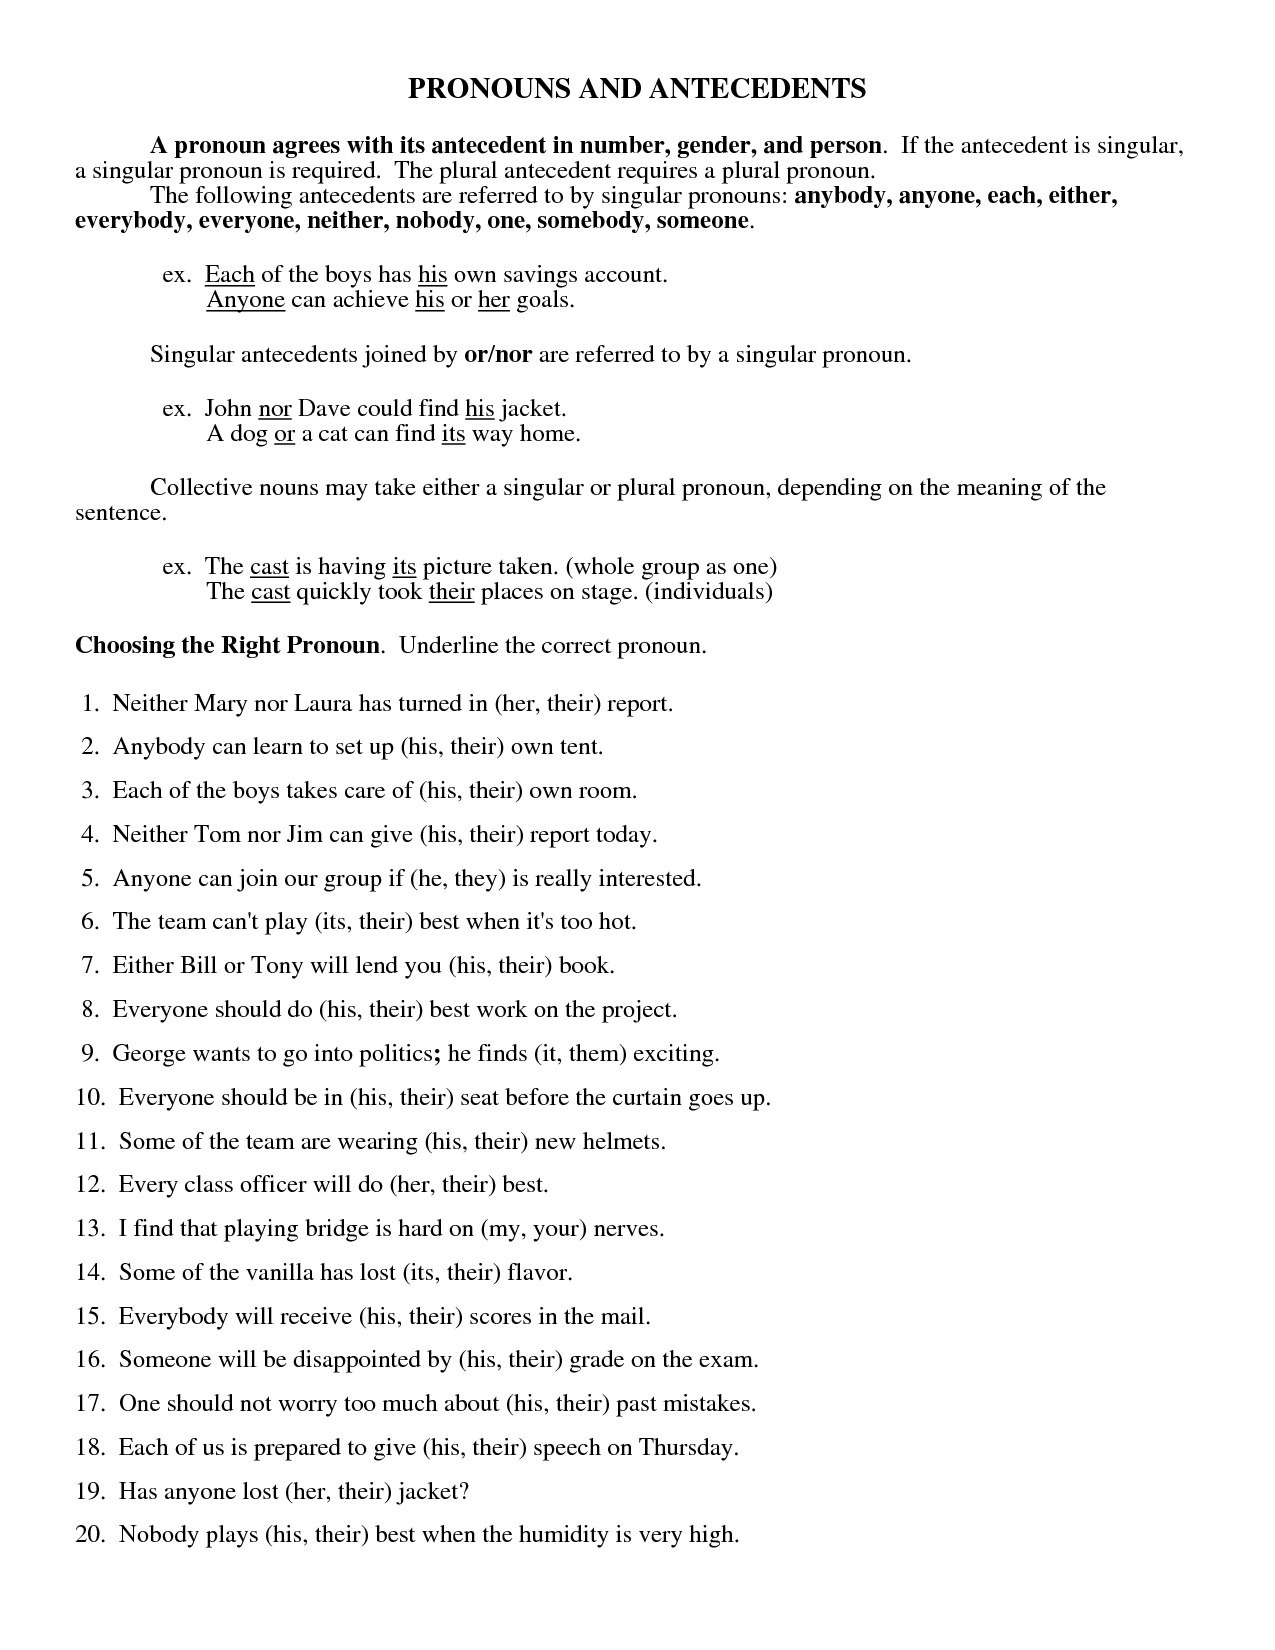 Grammar Worksheets Agreement Of Pronoun With Antecedent Answers